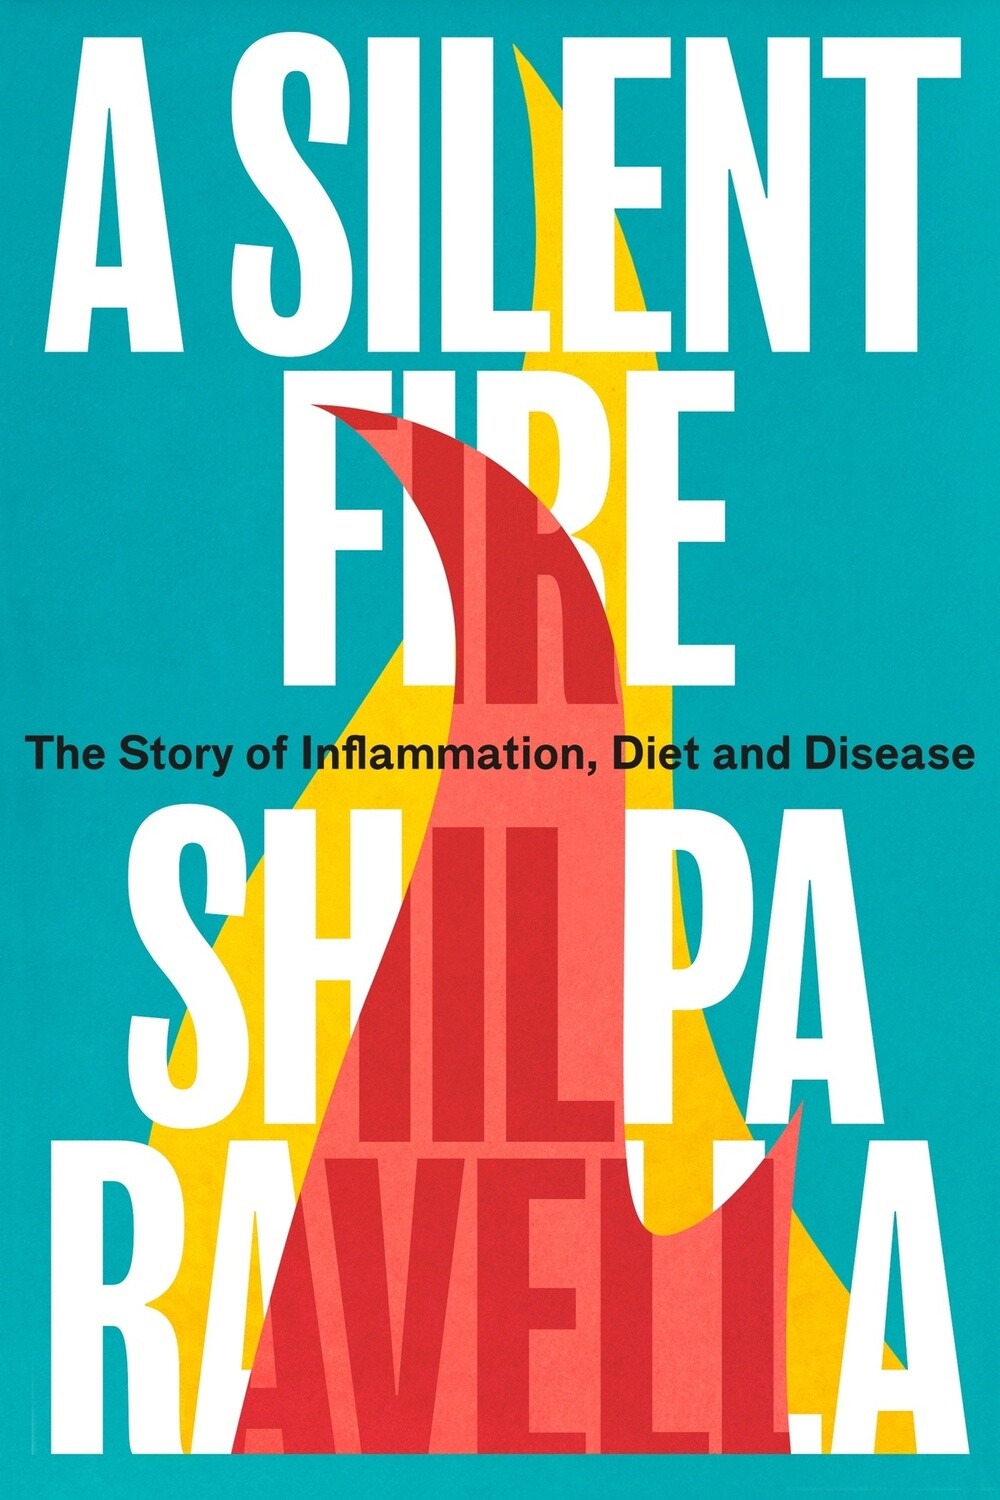 A Silent Fire: The Story of Inflammation, Diet and Disease by Shilpa Ravella